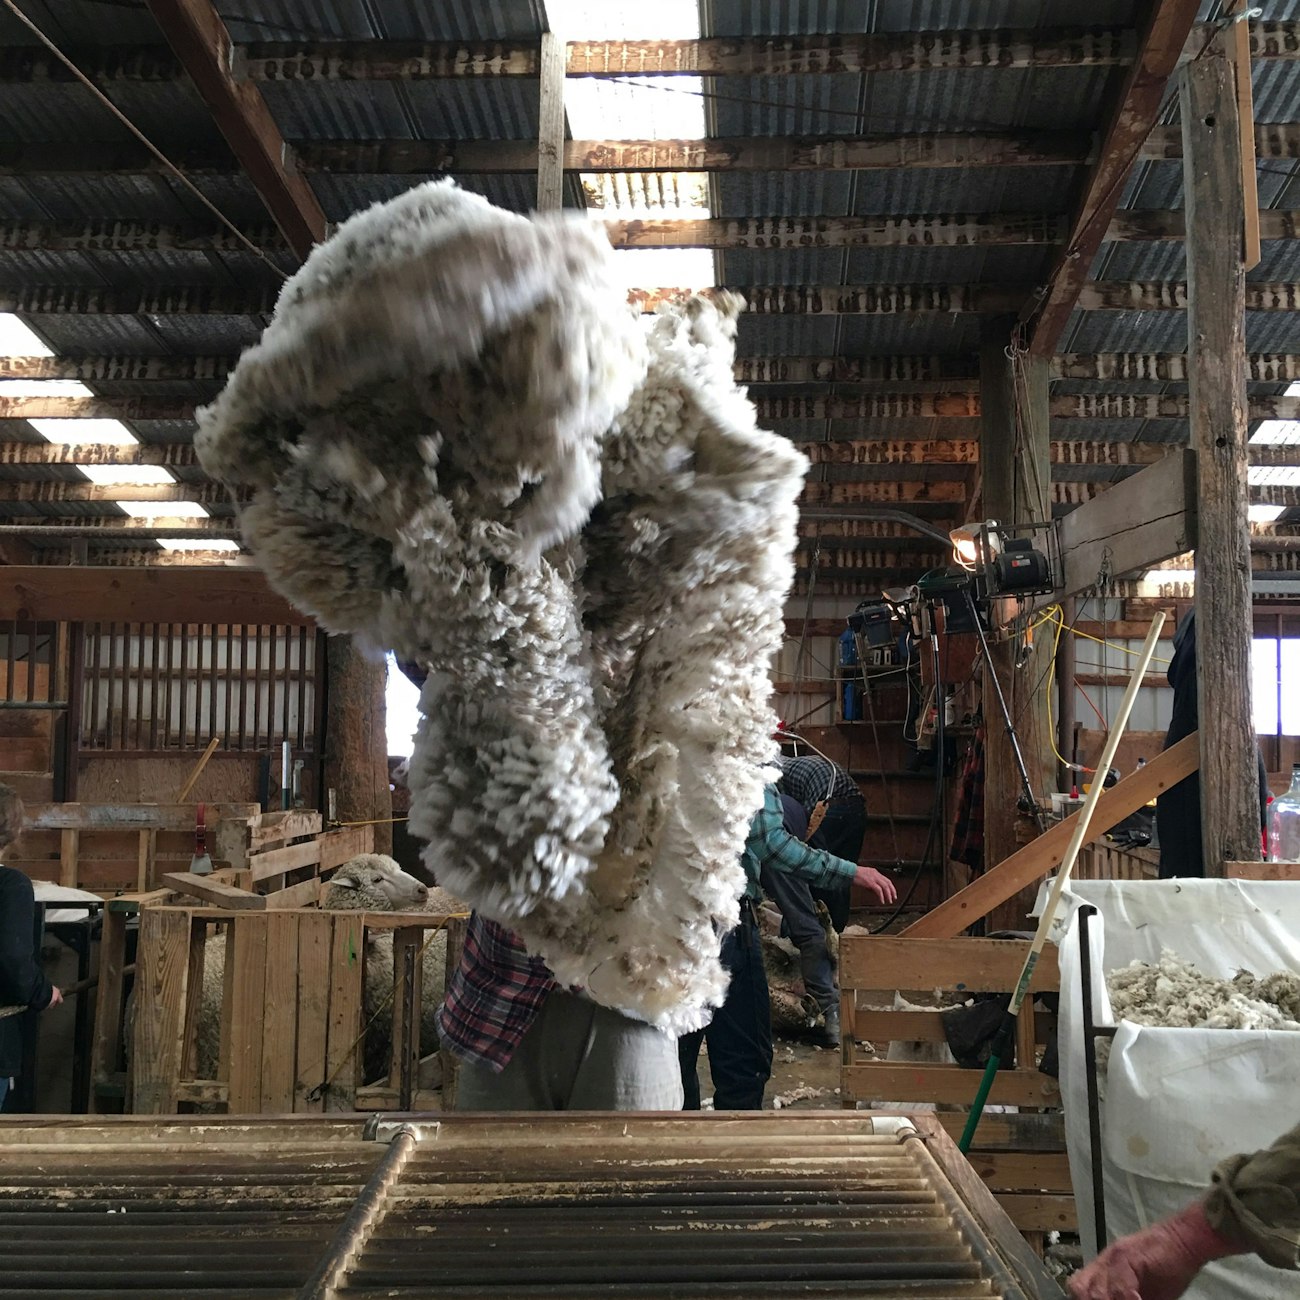 Wool fleece in the air about to fall on a slotted table